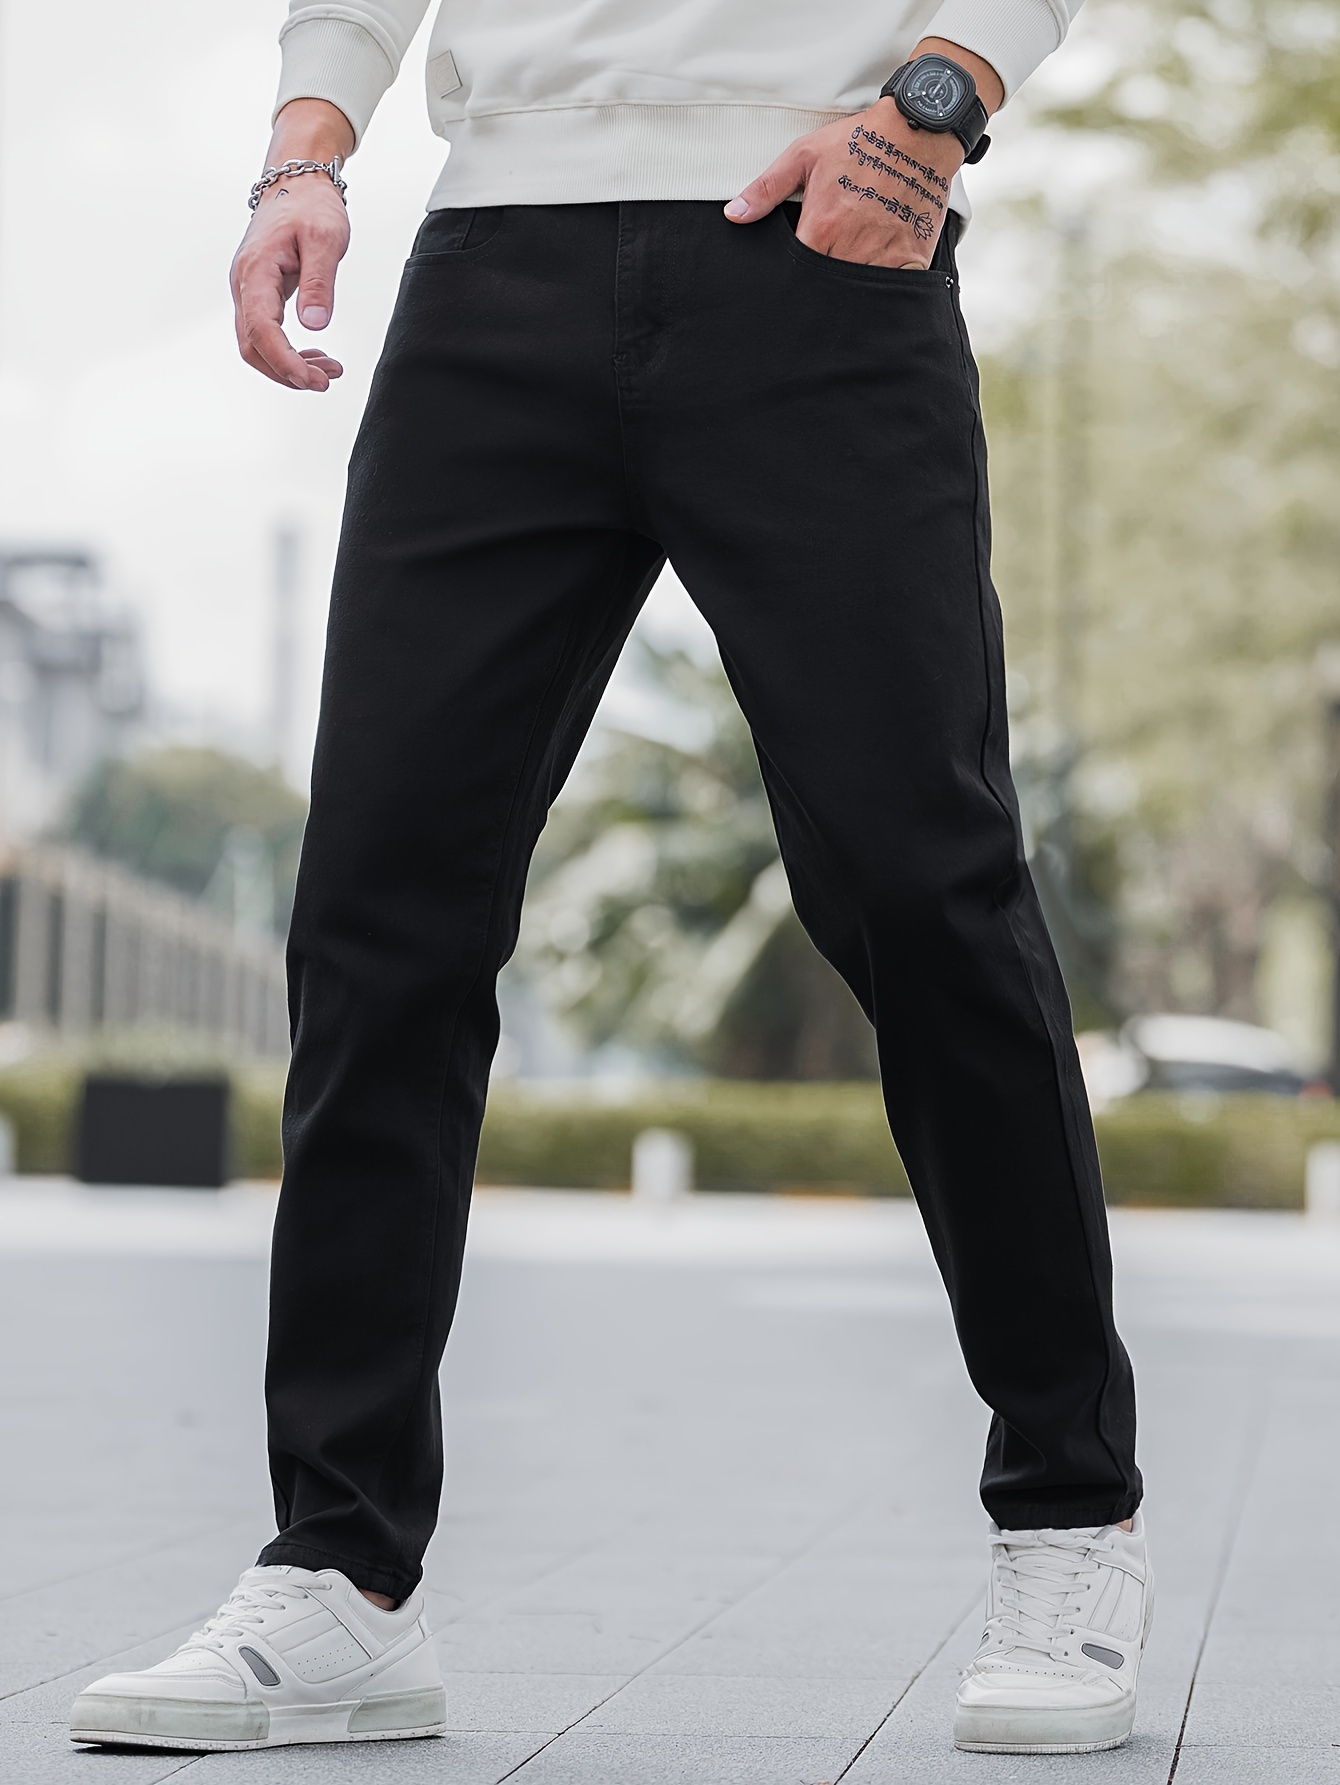 Men's Summer Slim Fit Suit Pants, Lightweight Non-Ironing Anti-Wrinkle High  Stretch Pants Dress Pants Black at  Men's Clothing store